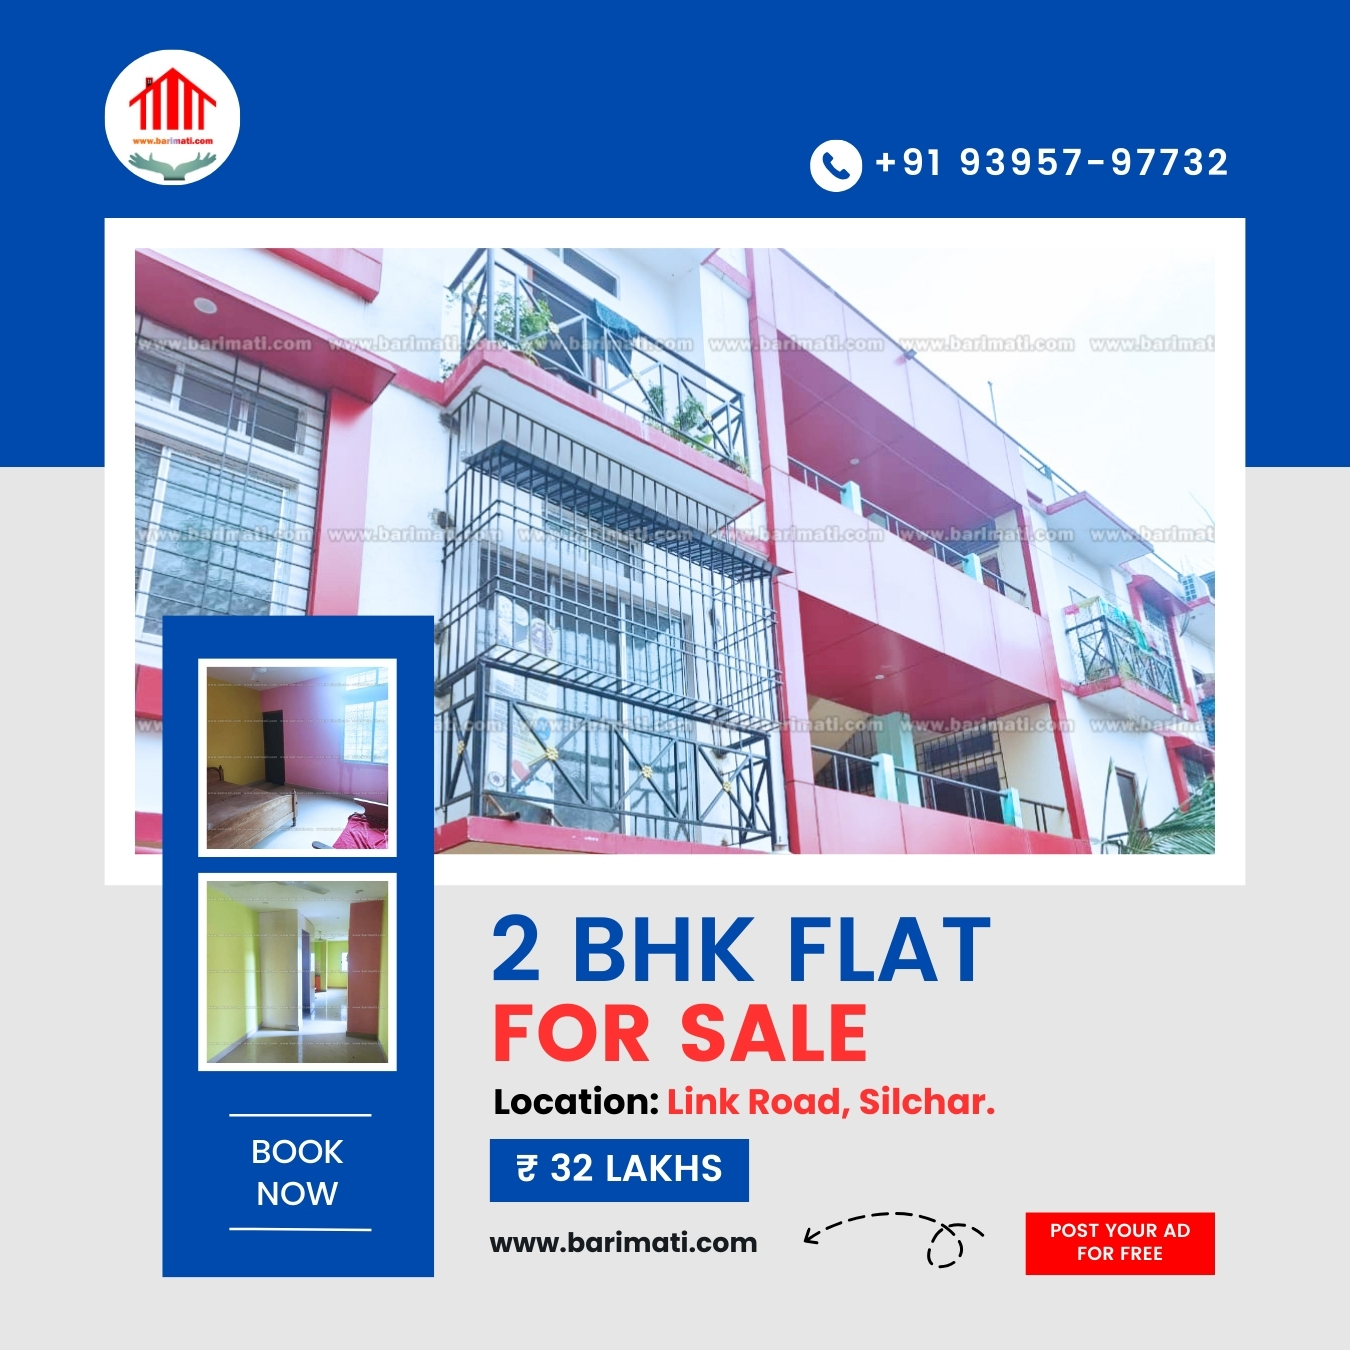 2 bhk flat for sale in Silchar, Assam